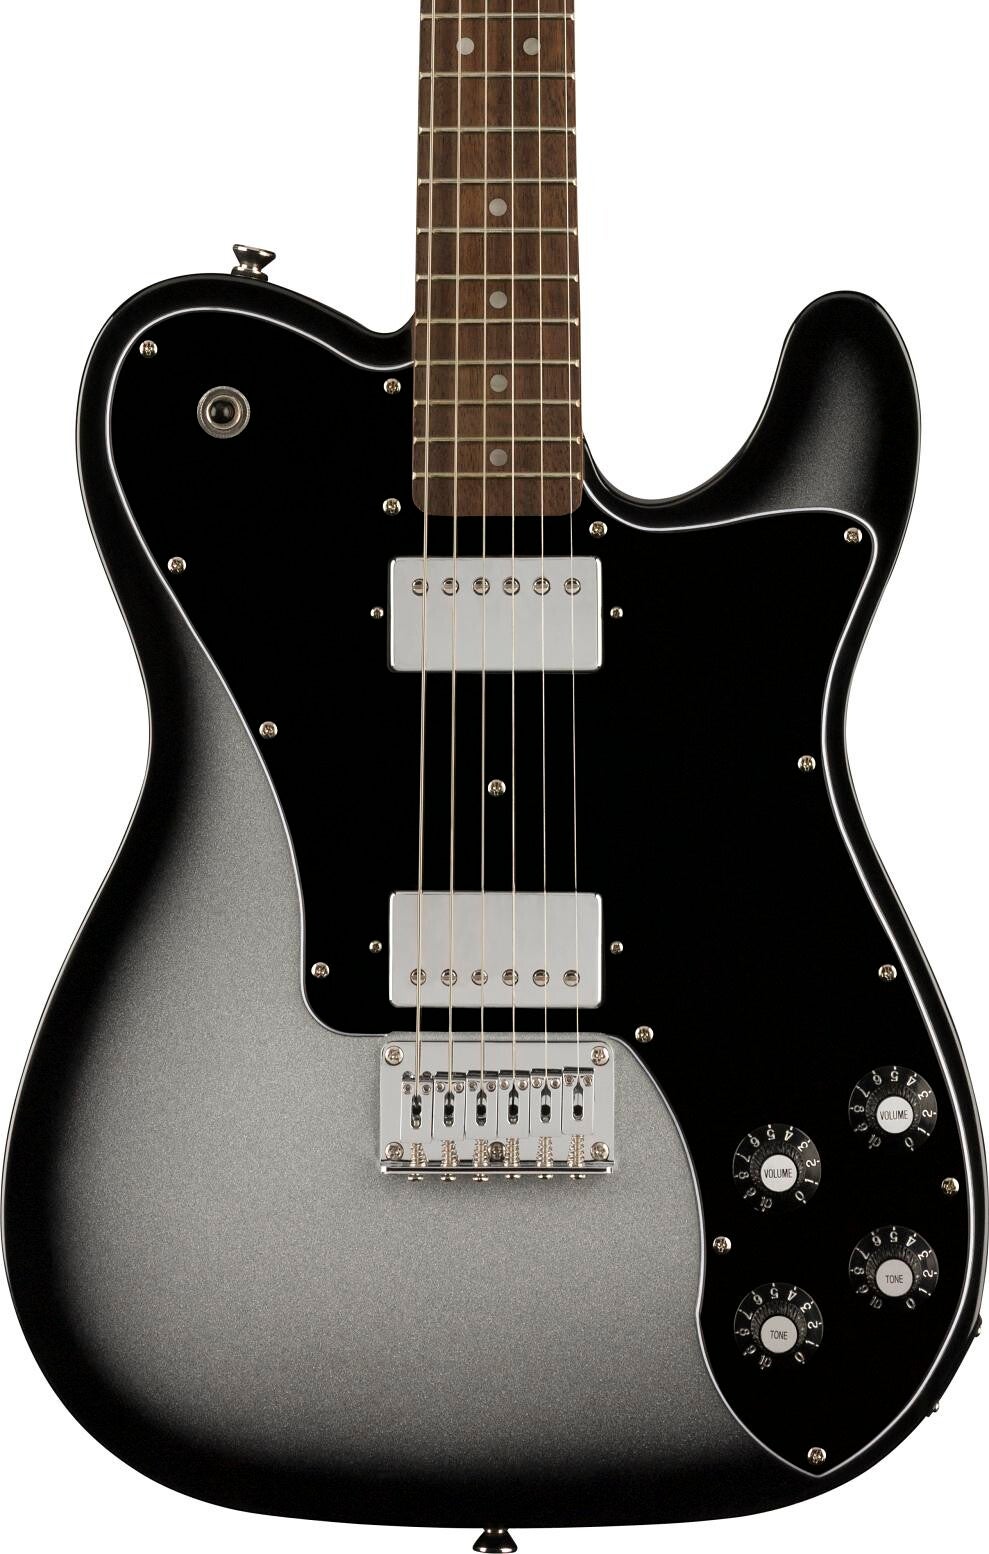 Squier Affinity Series Telecaster Deluxe Electric Guitar - Silver Burst